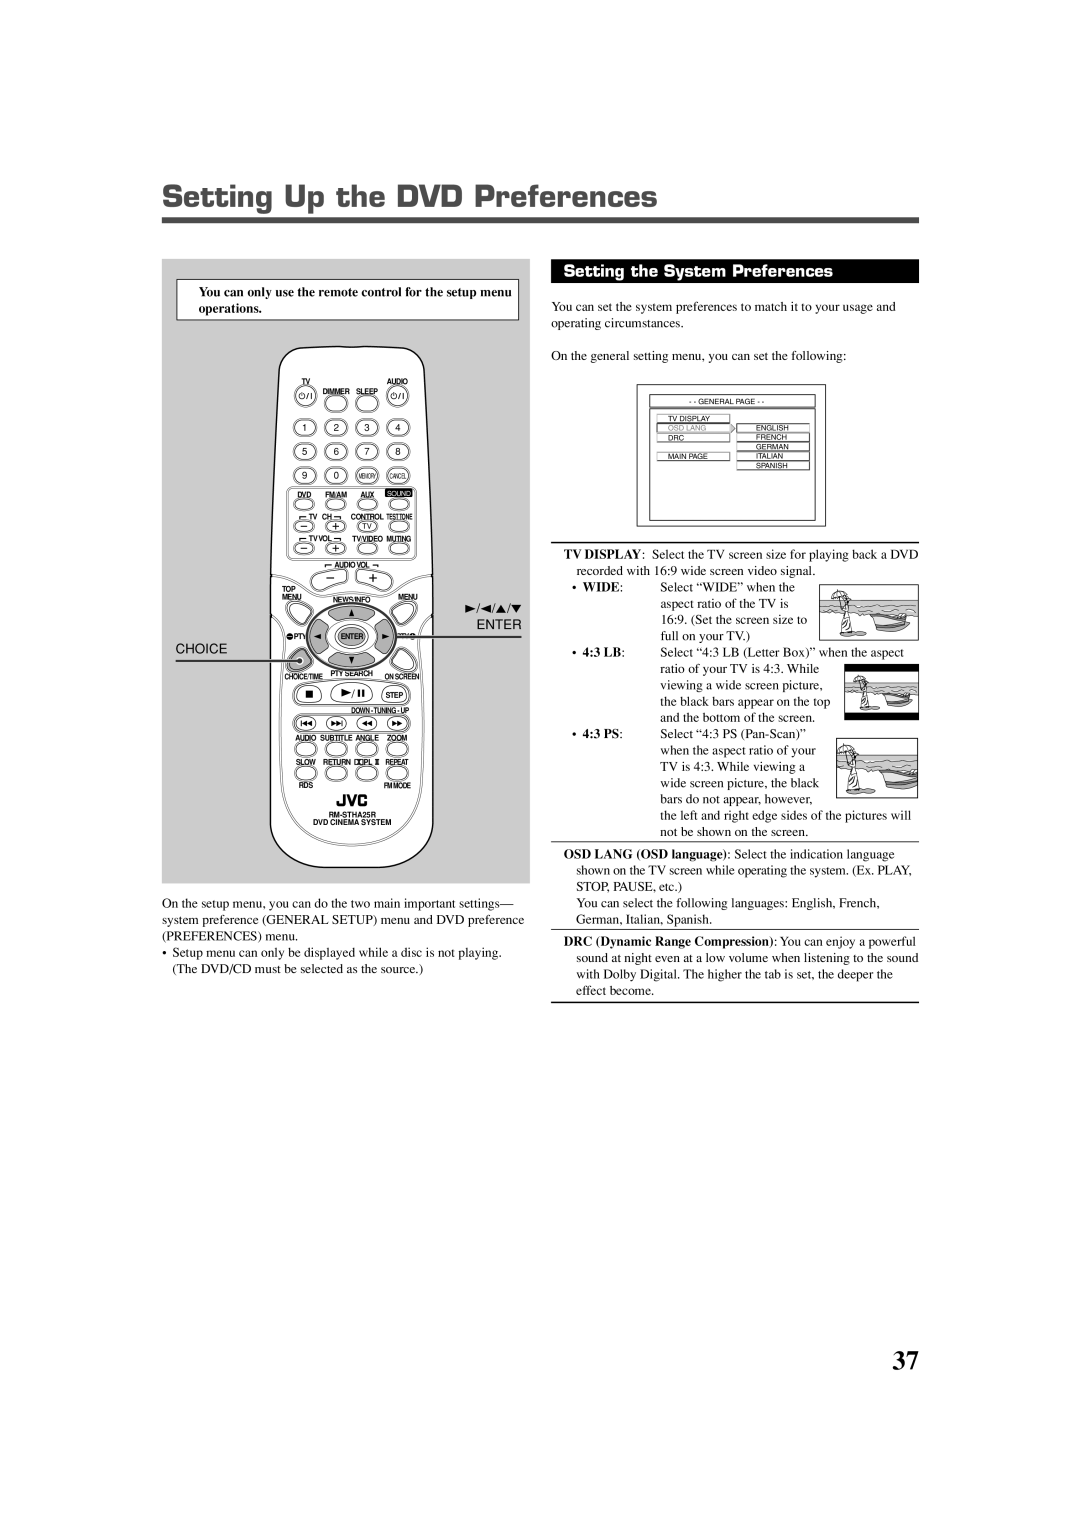 JVC TH-A25 manual Setting Up the DVD Preferences, Setting the System Preferences, Enter, Choice 